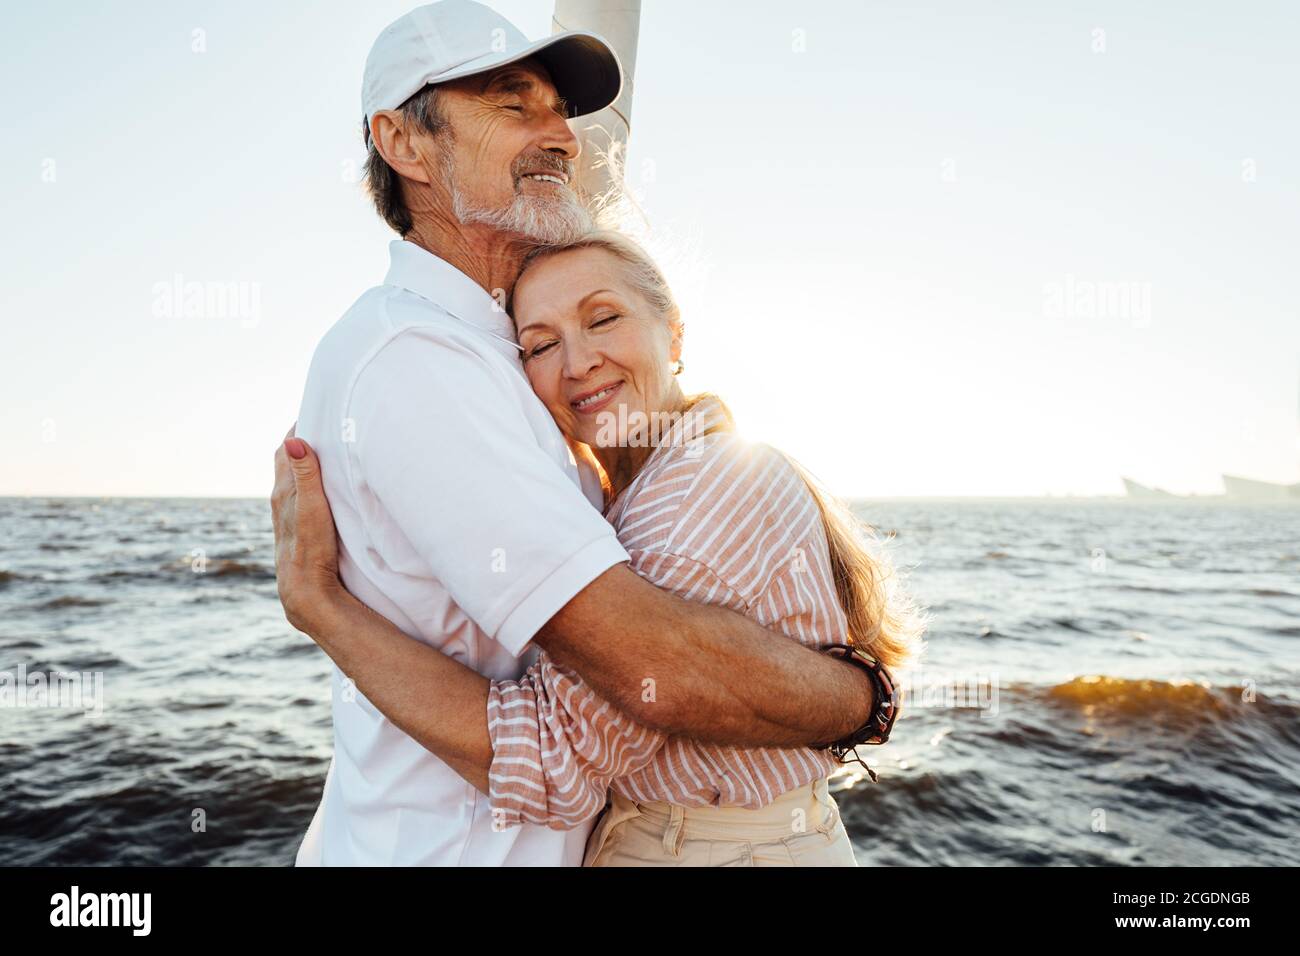 Affectionate senior couple embracing on private yacht. Beautiful mature woman leaning on husband's chest with eyes closed. Stock Photo